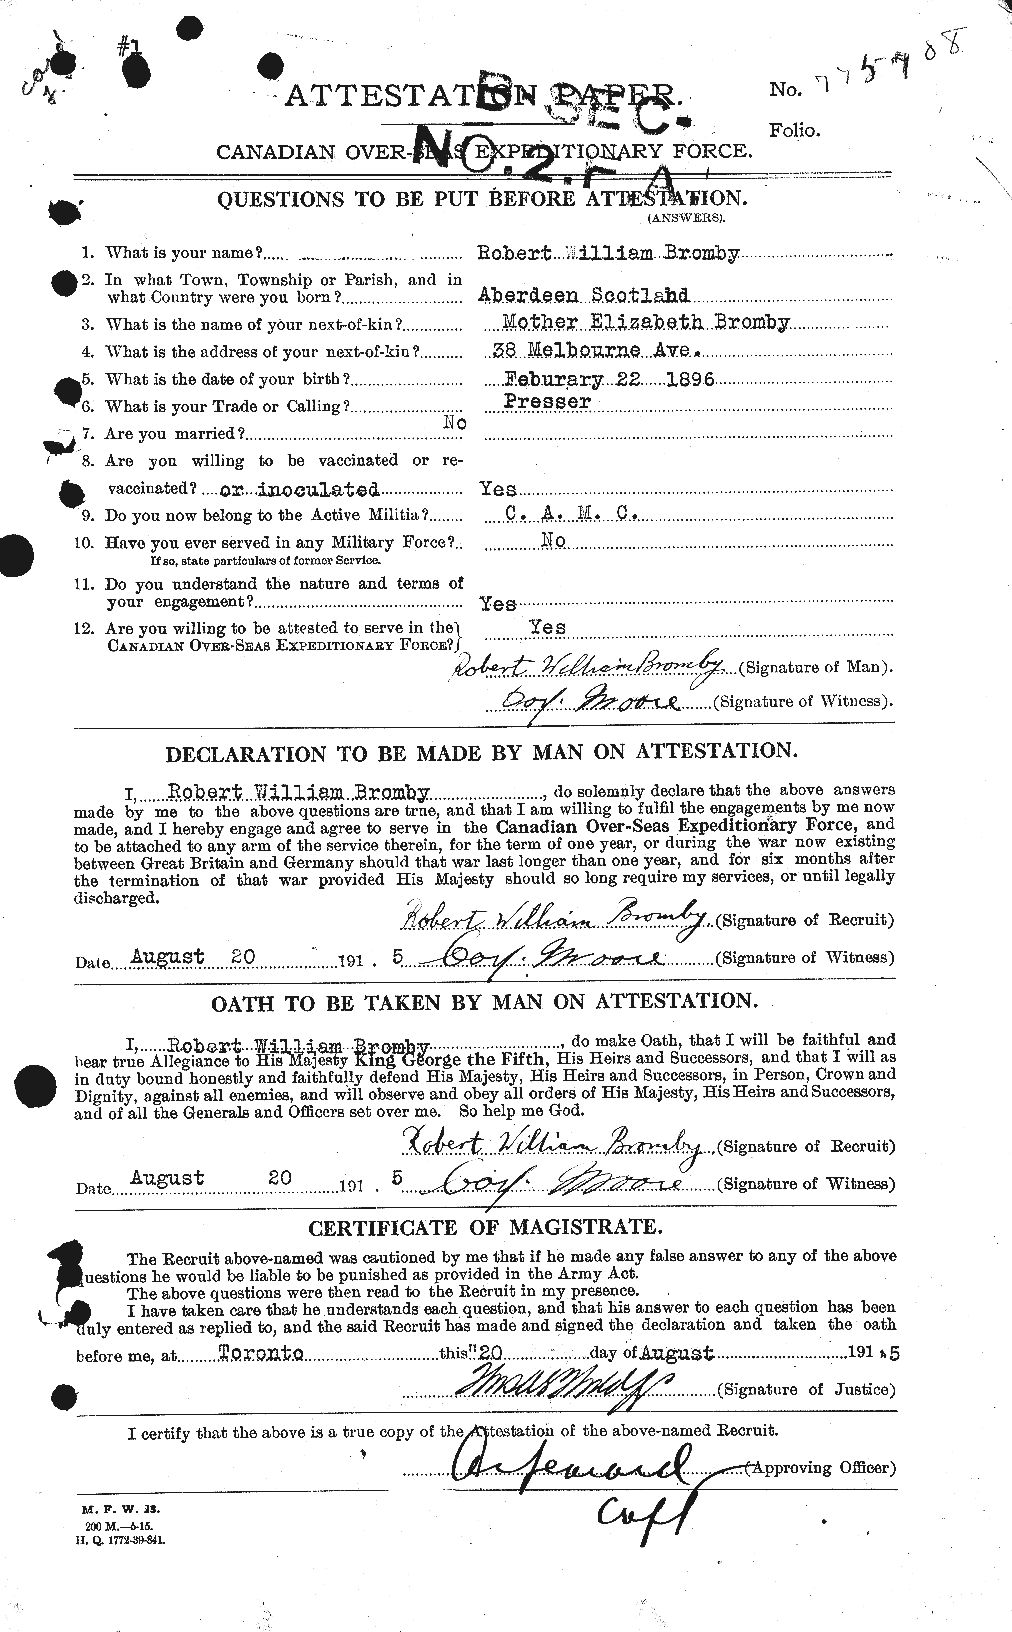 Personnel Records of the First World War - CEF 262133a